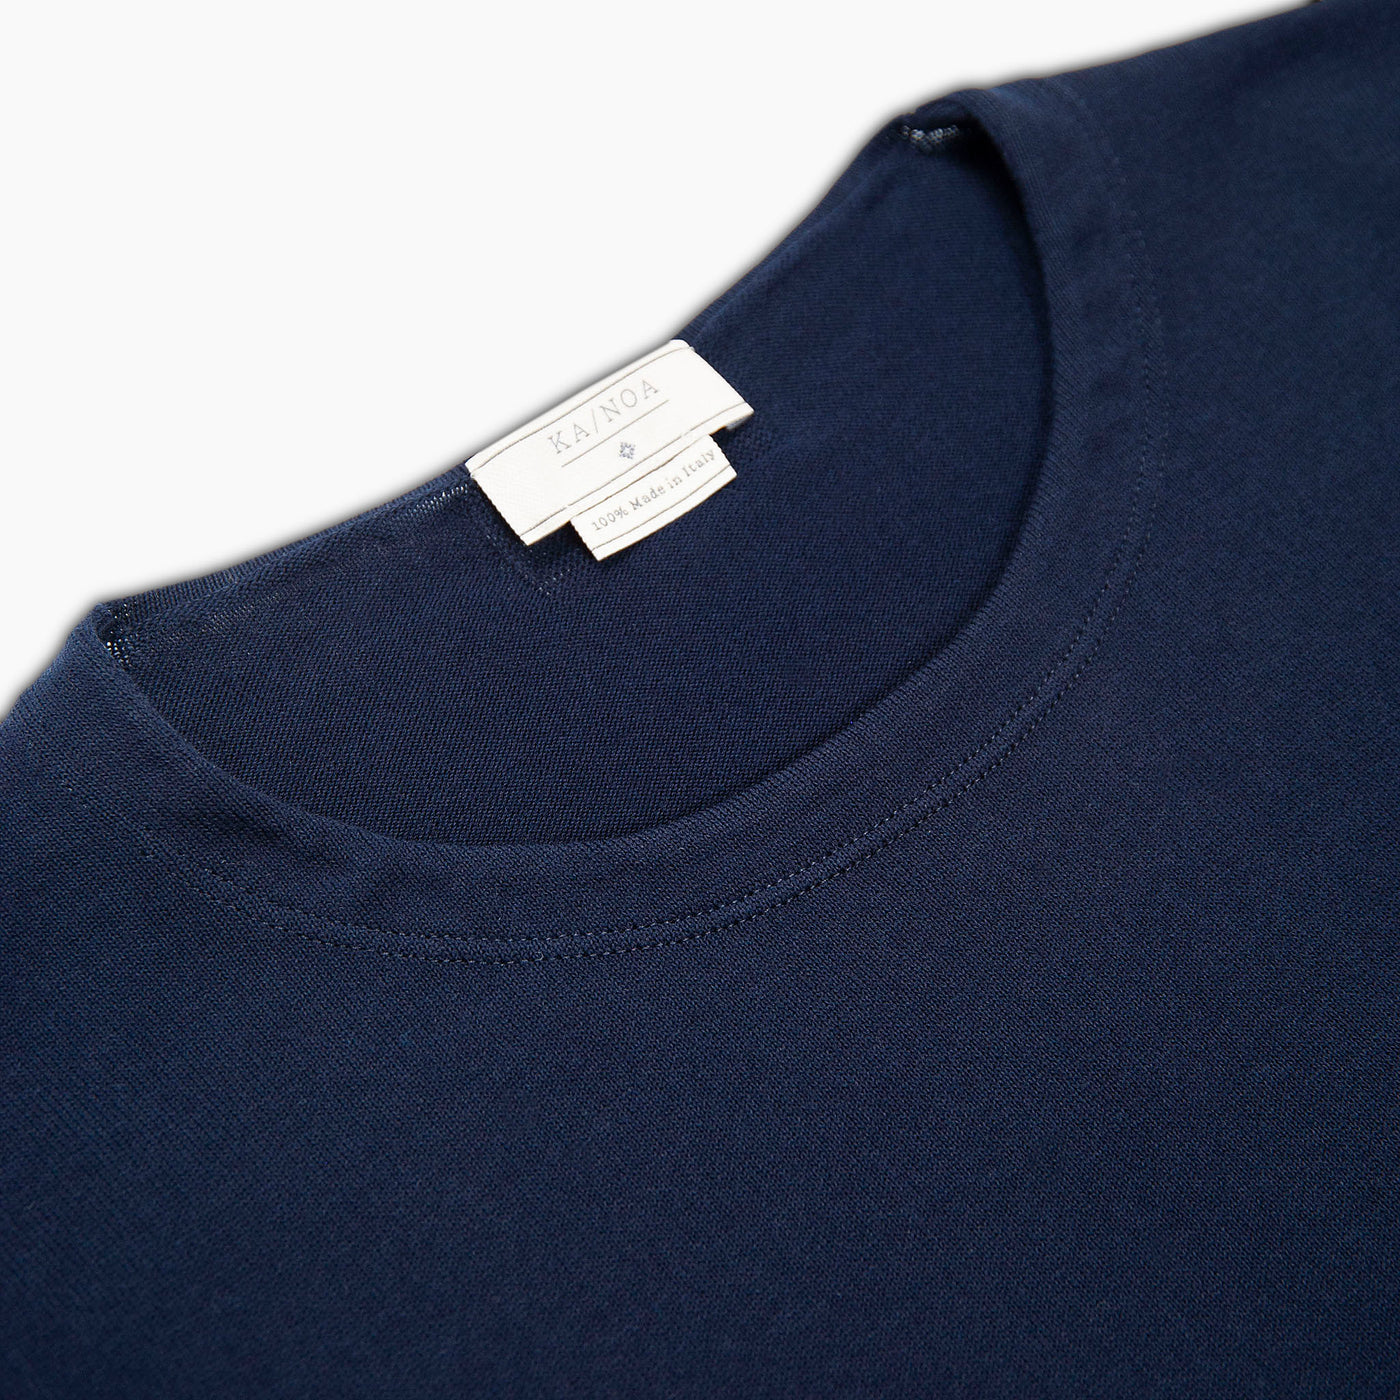 Richard short-sleeved knitted t-shirt in compact Egyptian cotton (dark blue)